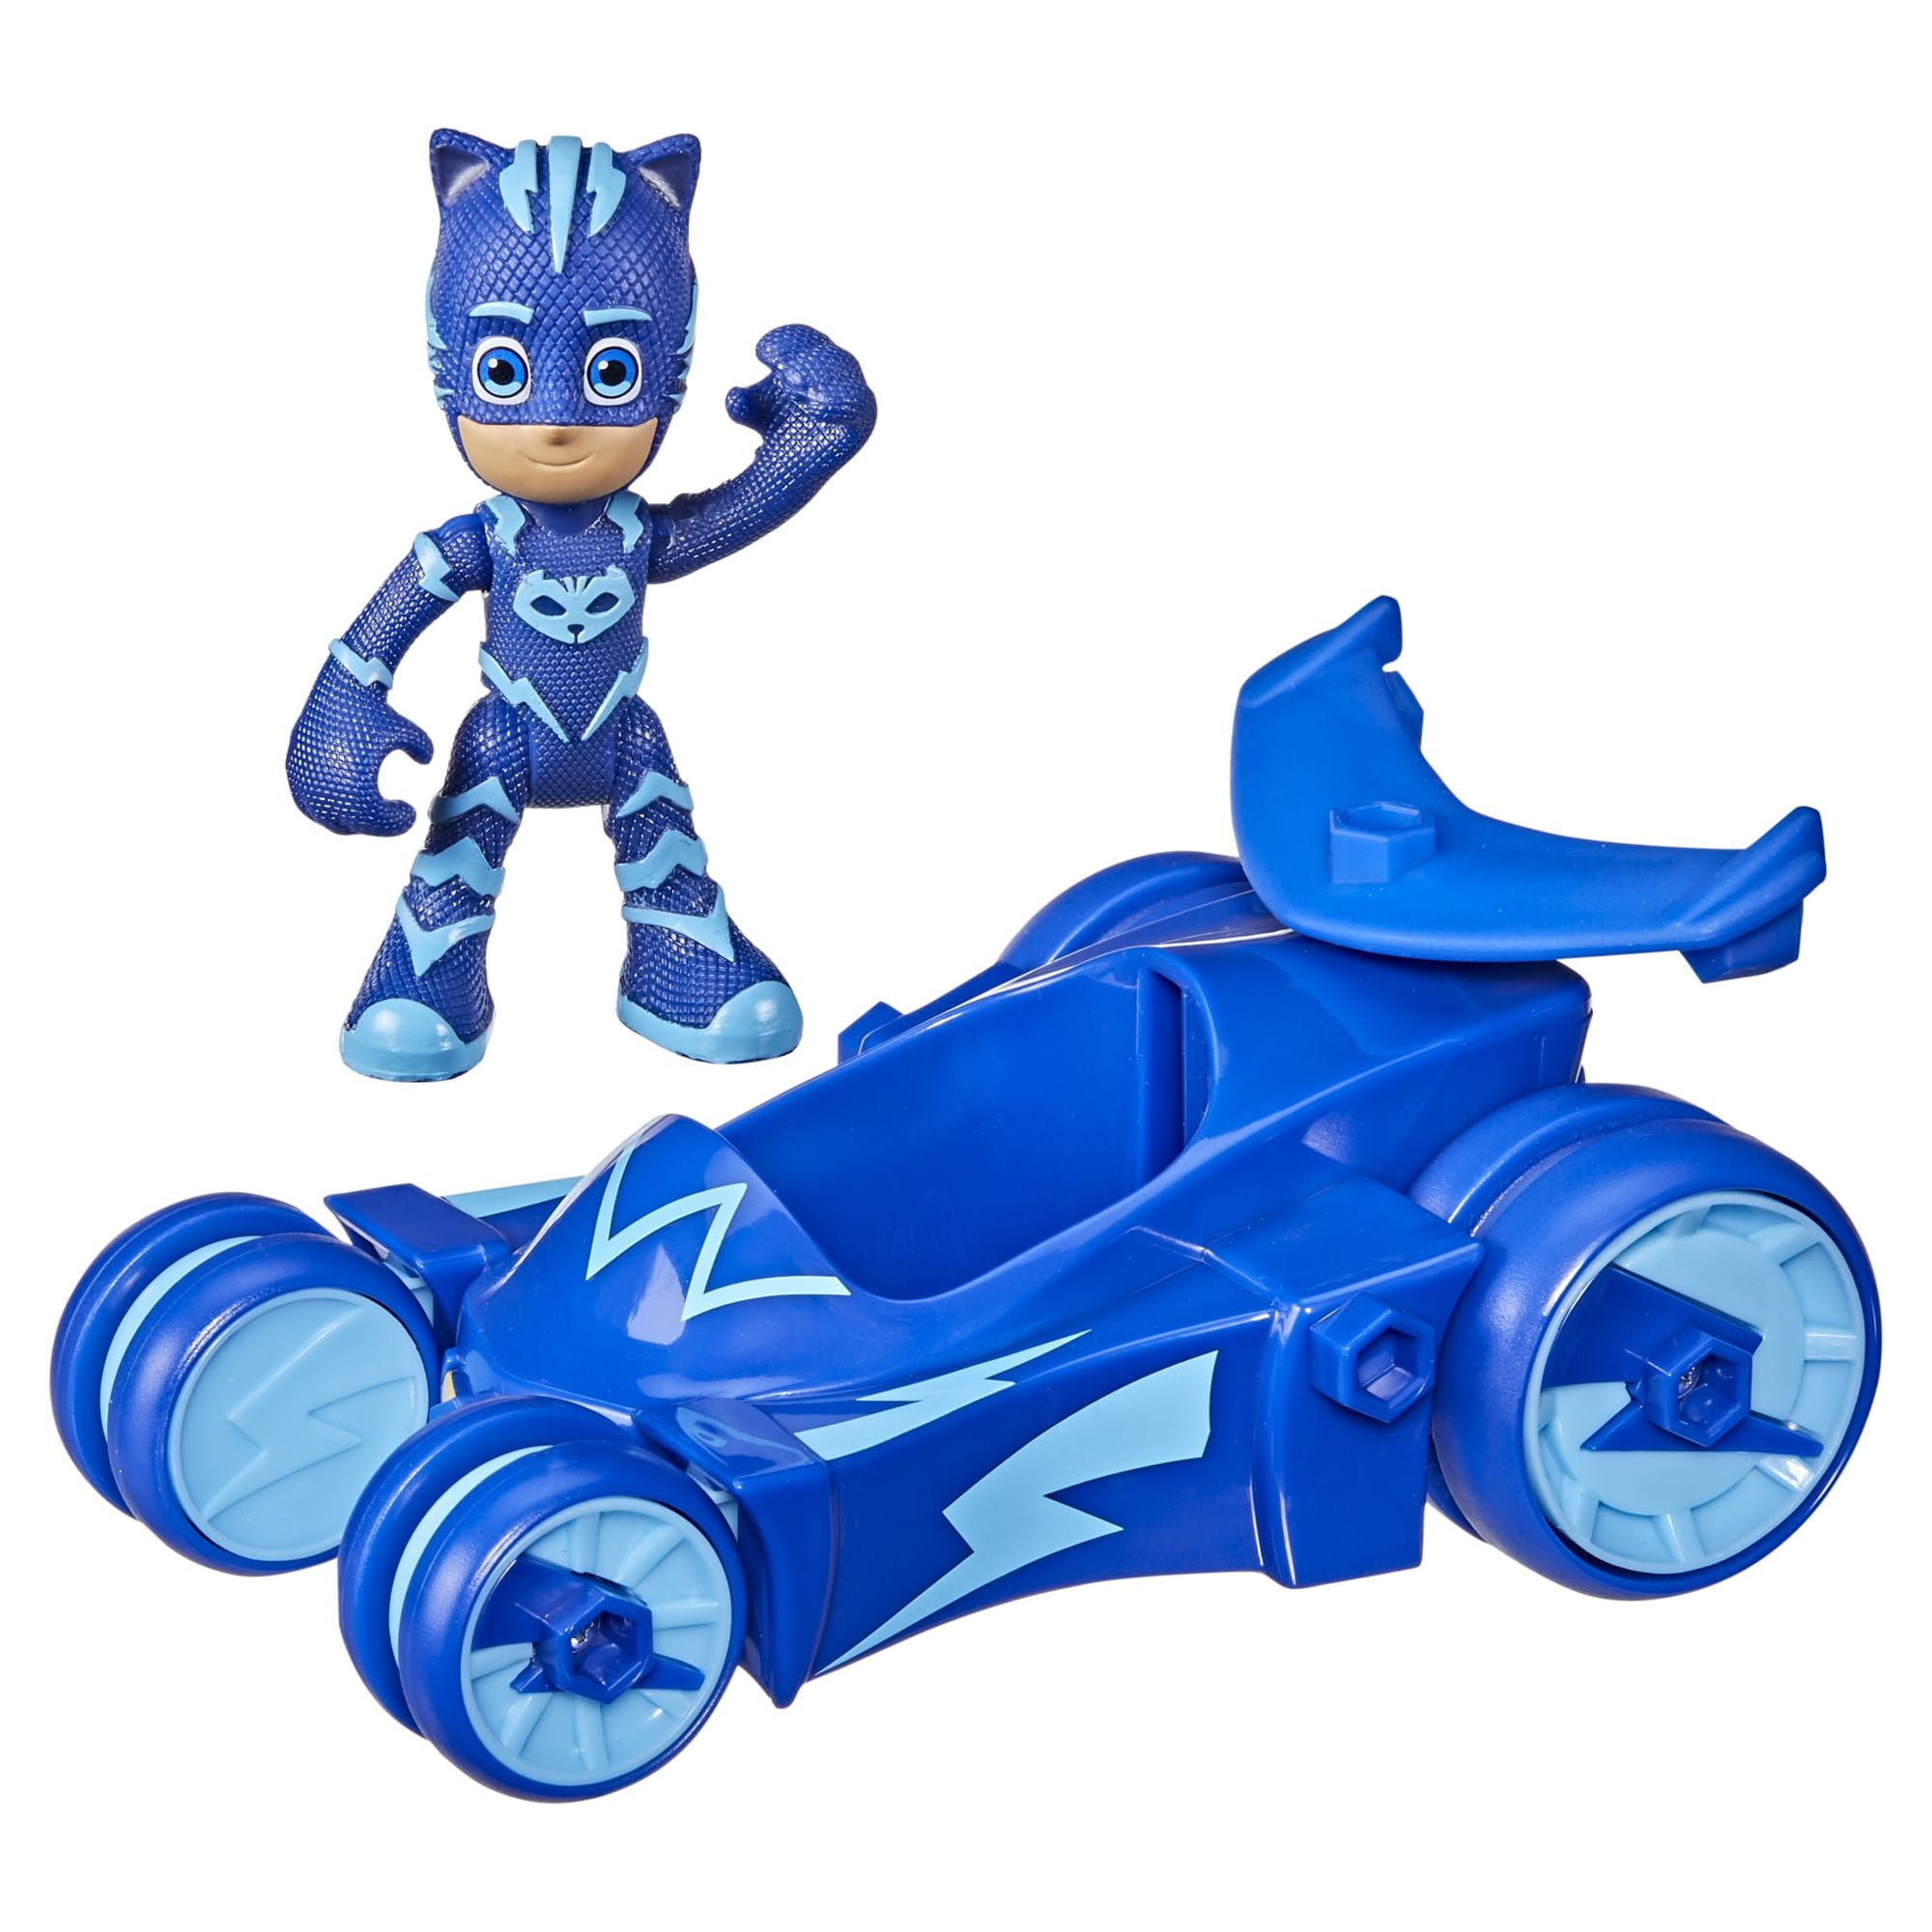 PJ Masks Cat-Car Preschool Toy, Hero Vehicle with Catboy Action